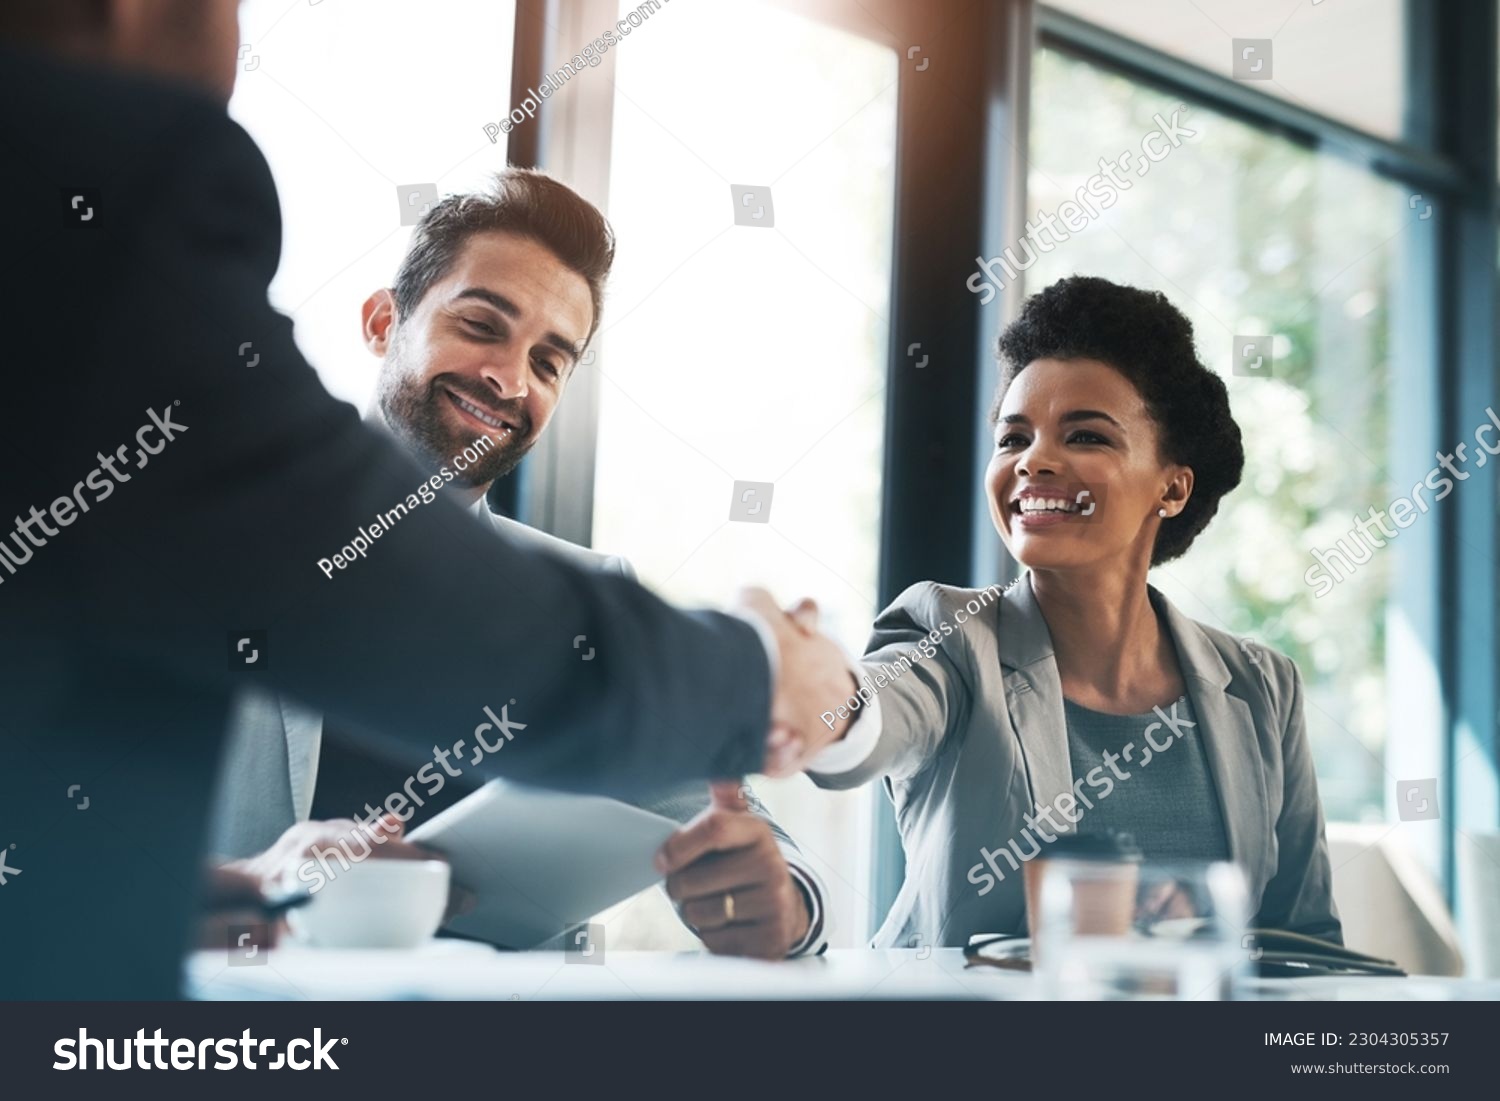 Business people, handshake and meeting for partnership, teamwork or collaboration in boardroom at office. Happy woman shaking hands in team recruiting, introduction or b2b agreement at the workplace #2304305357